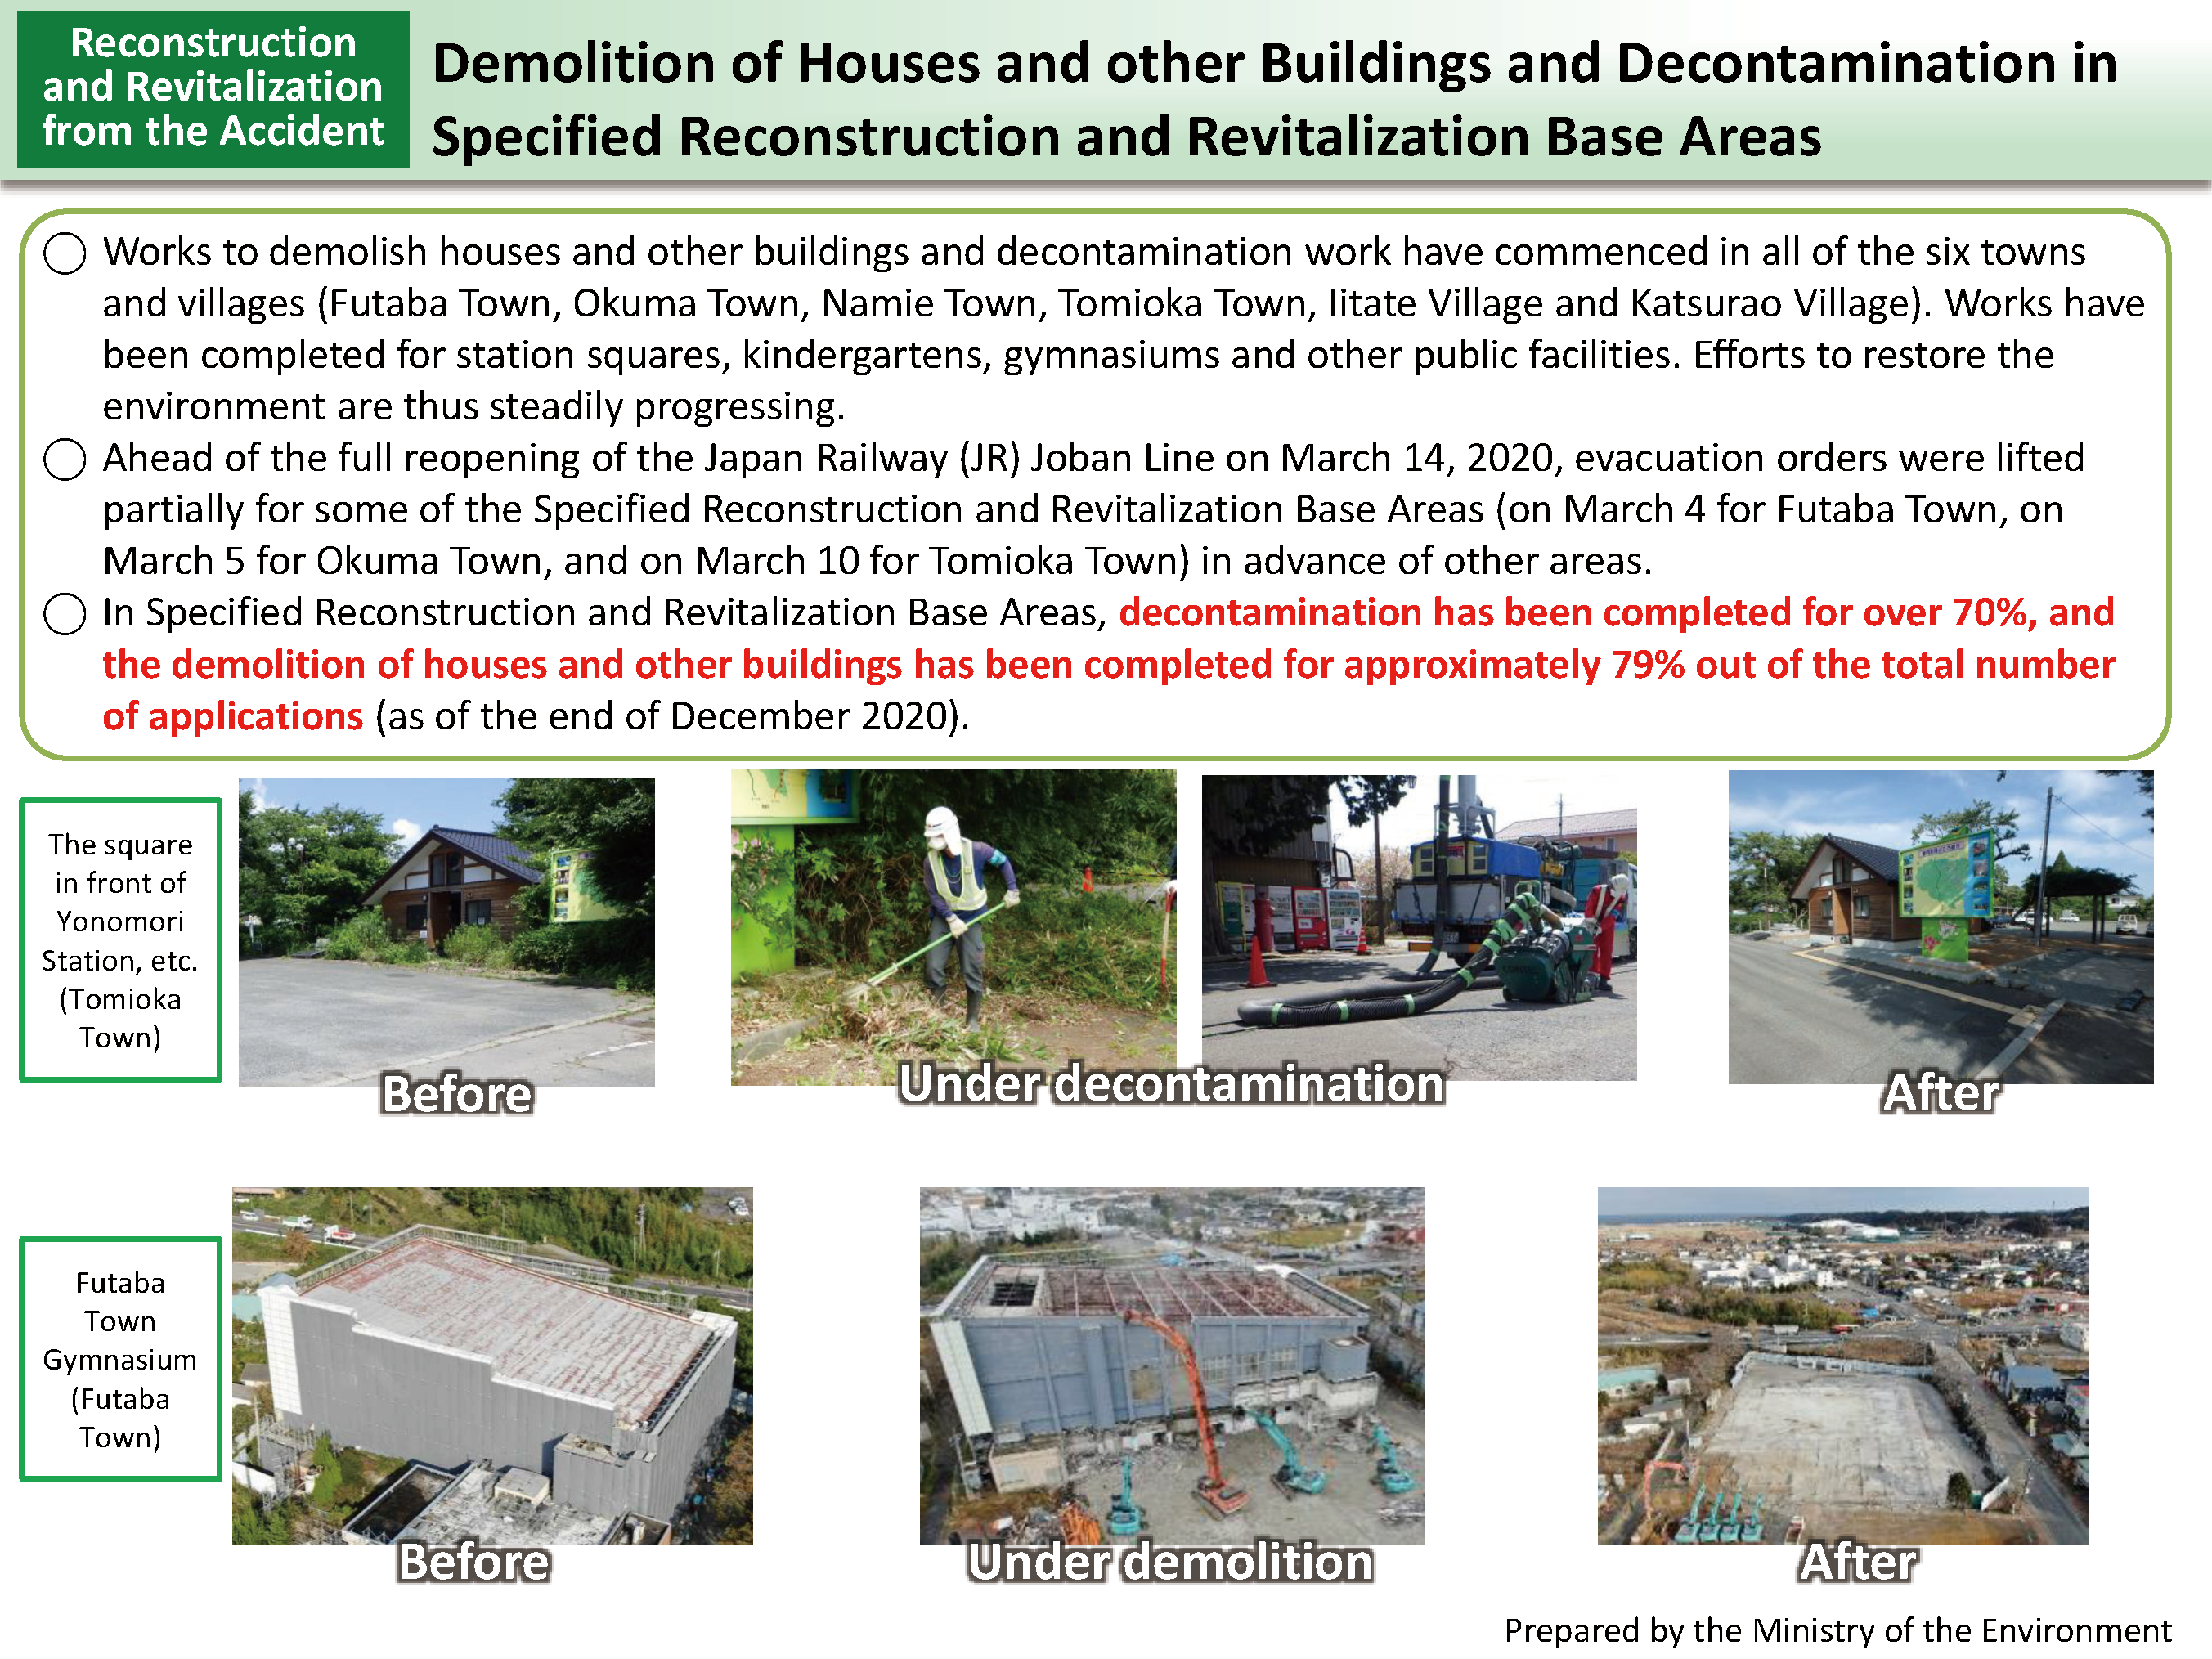 Demolition of Houses and other Buildings and Decontamination in Specified Reconstruction and Revitalization Base Areas